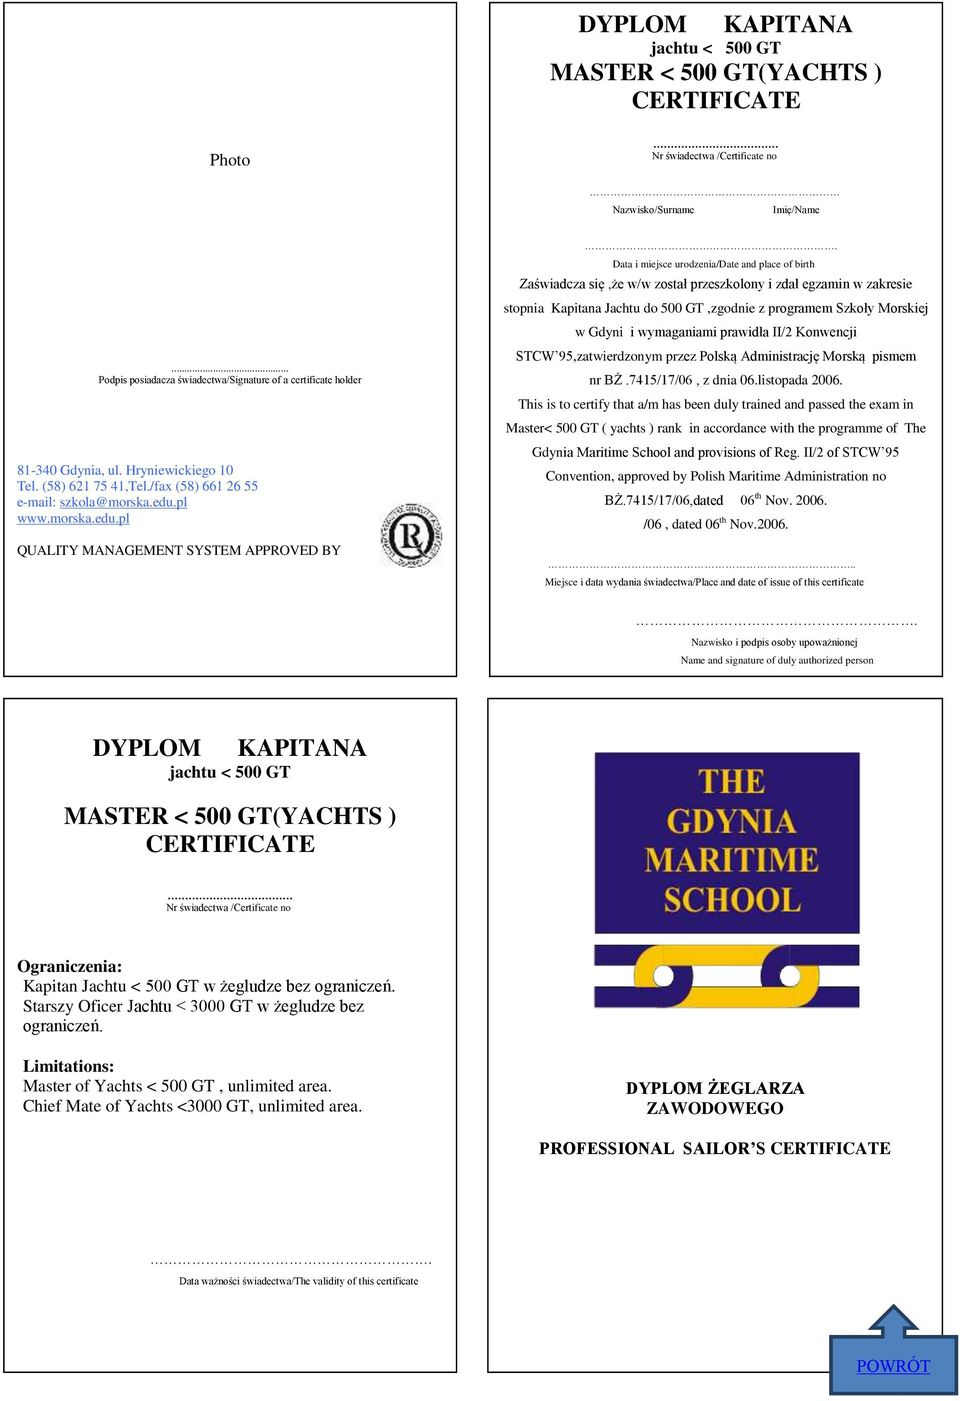 Master< 500 GT ( yachts ) rank in accordance with the programme of The Gdynia Maritime School and provisions of Reg. II/2 of STCW 95 Convention, approved by Polish Maritime Administration no BŻ.